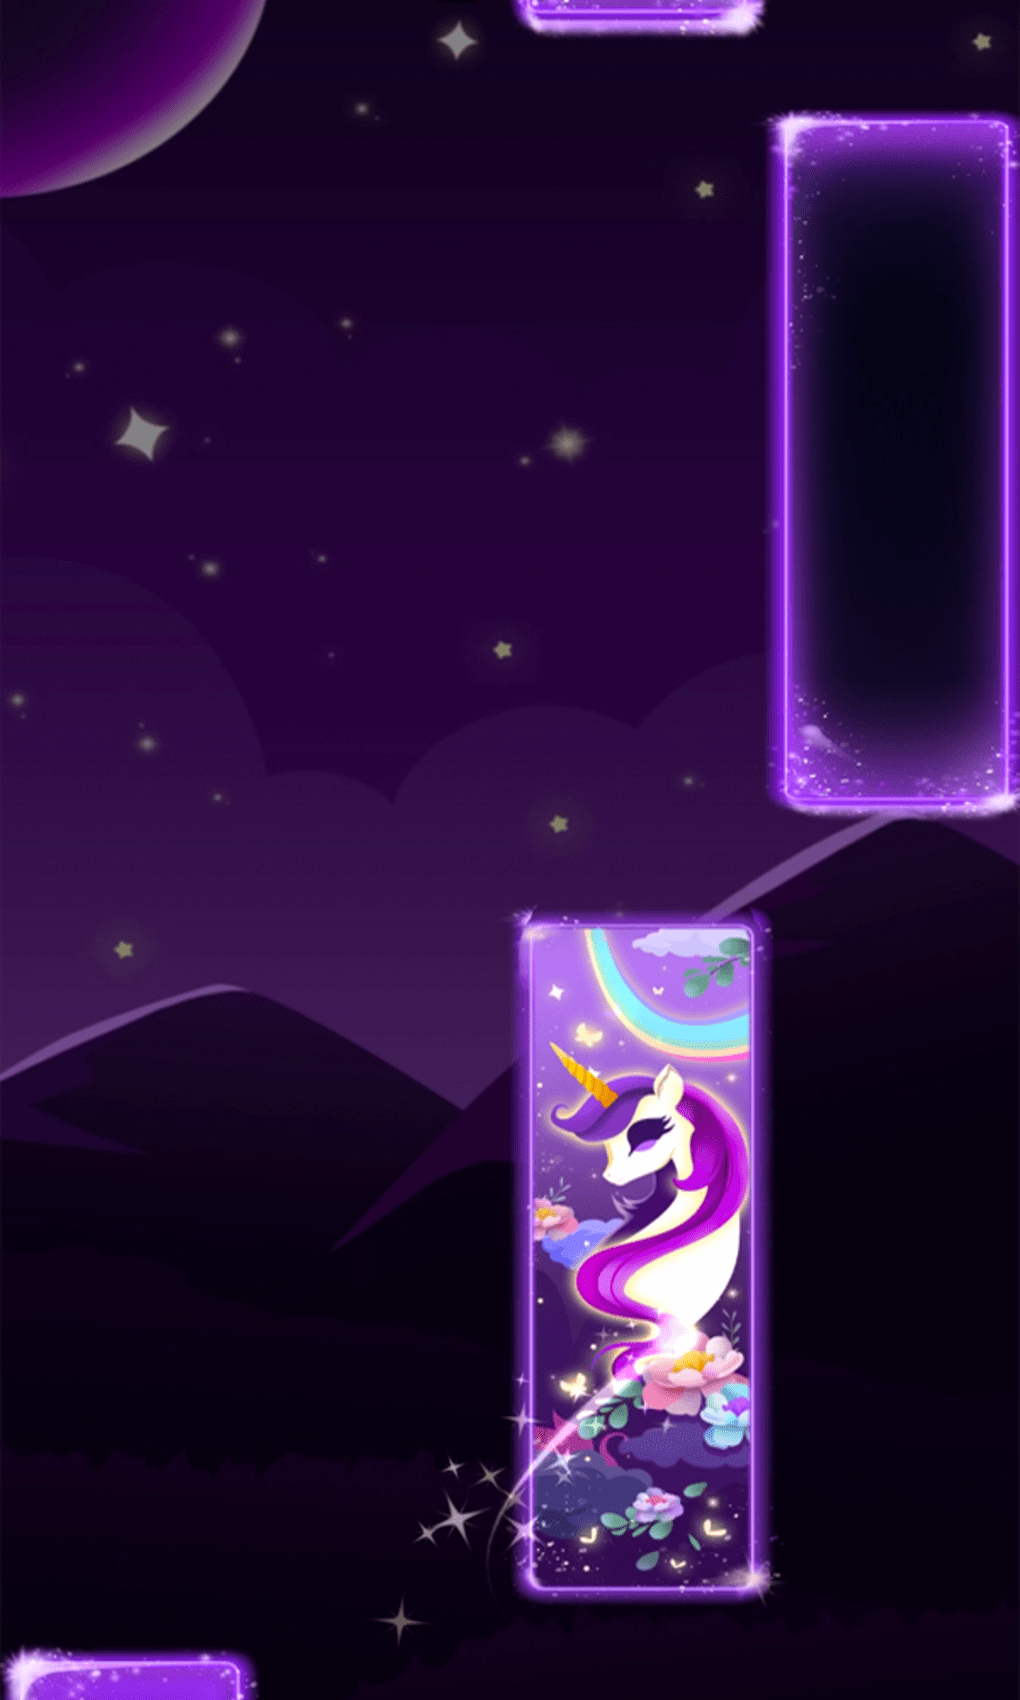 Magic Unicorn Piano Tiles Game for Android - Download